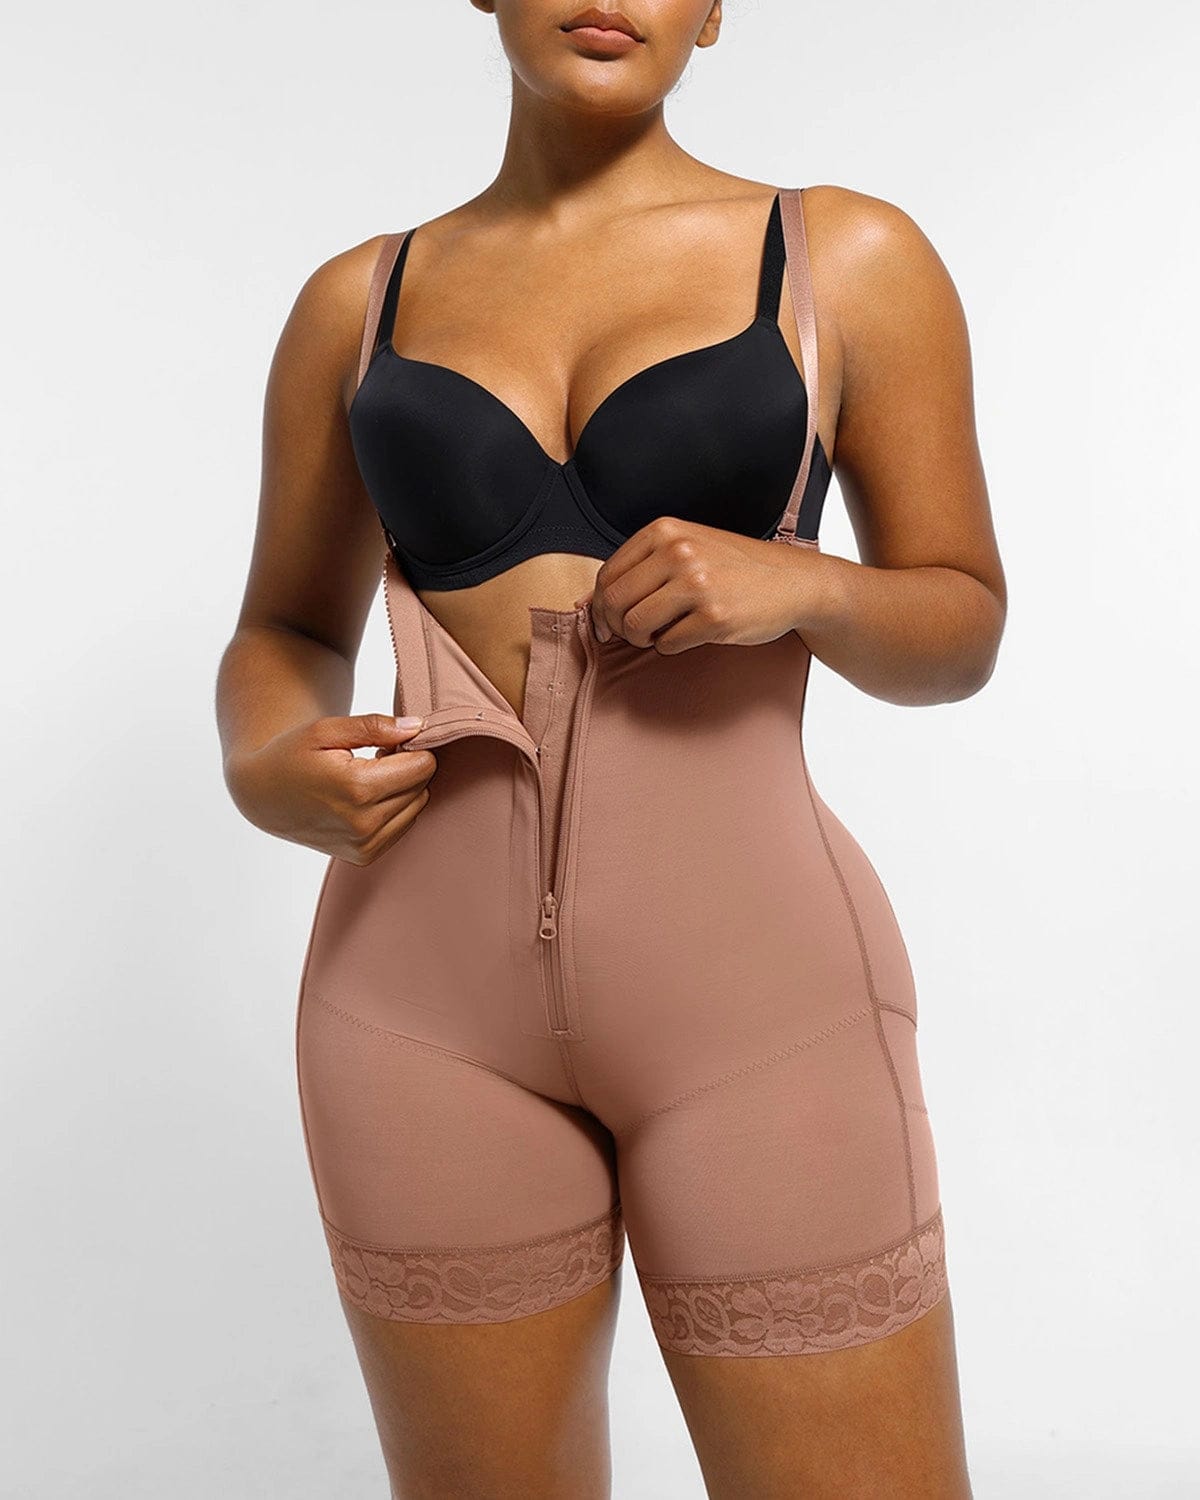 AirSlim® Firm Tummy Compression Bodysuit Shaper With Butt Lifter